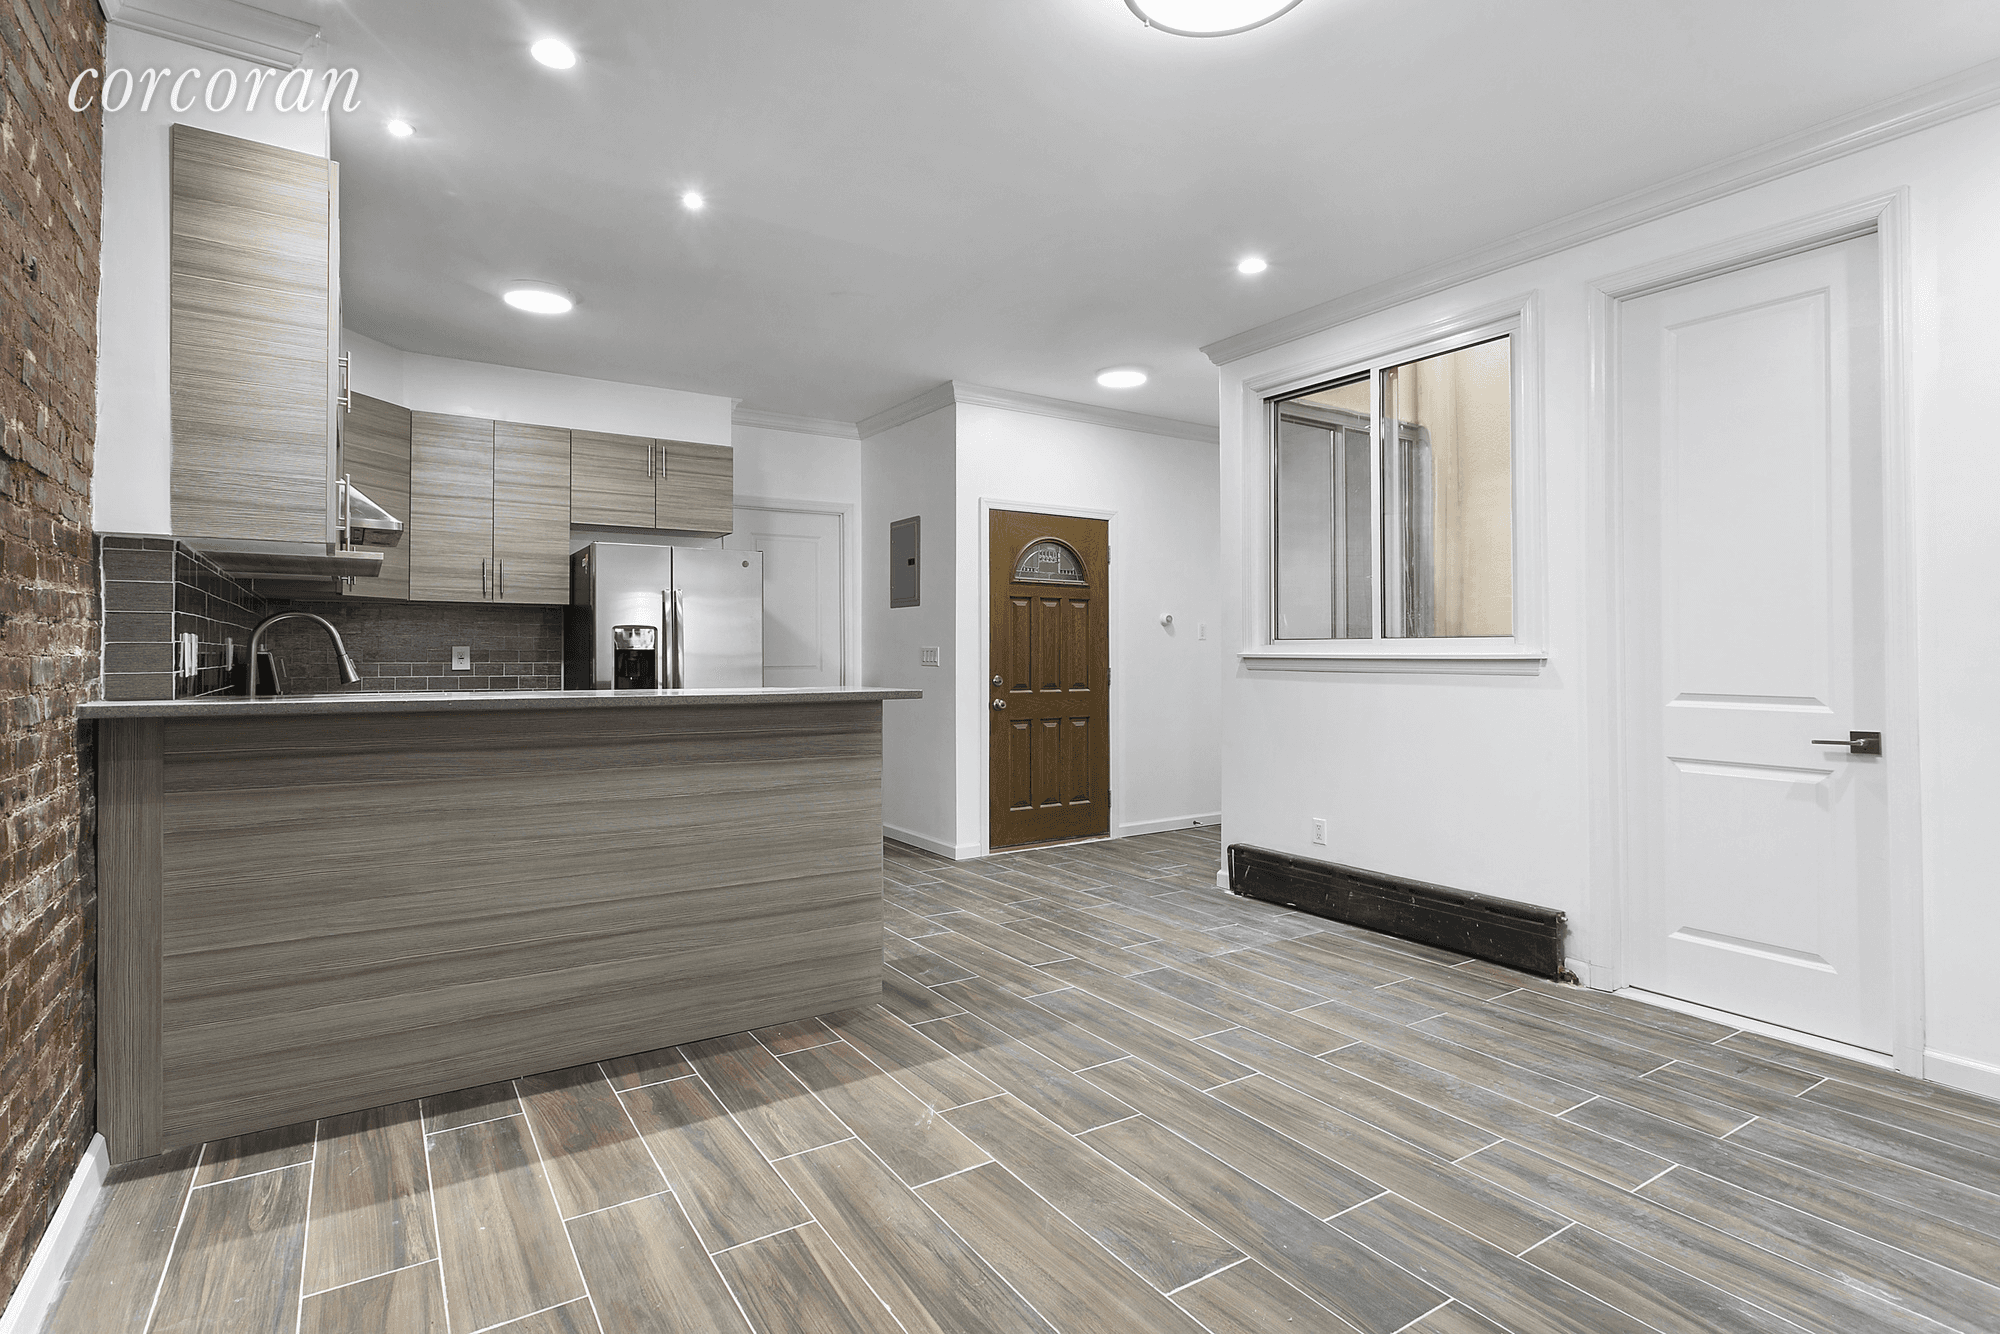 Brand new full floor townhouse apartment located in prime Crown Heights !